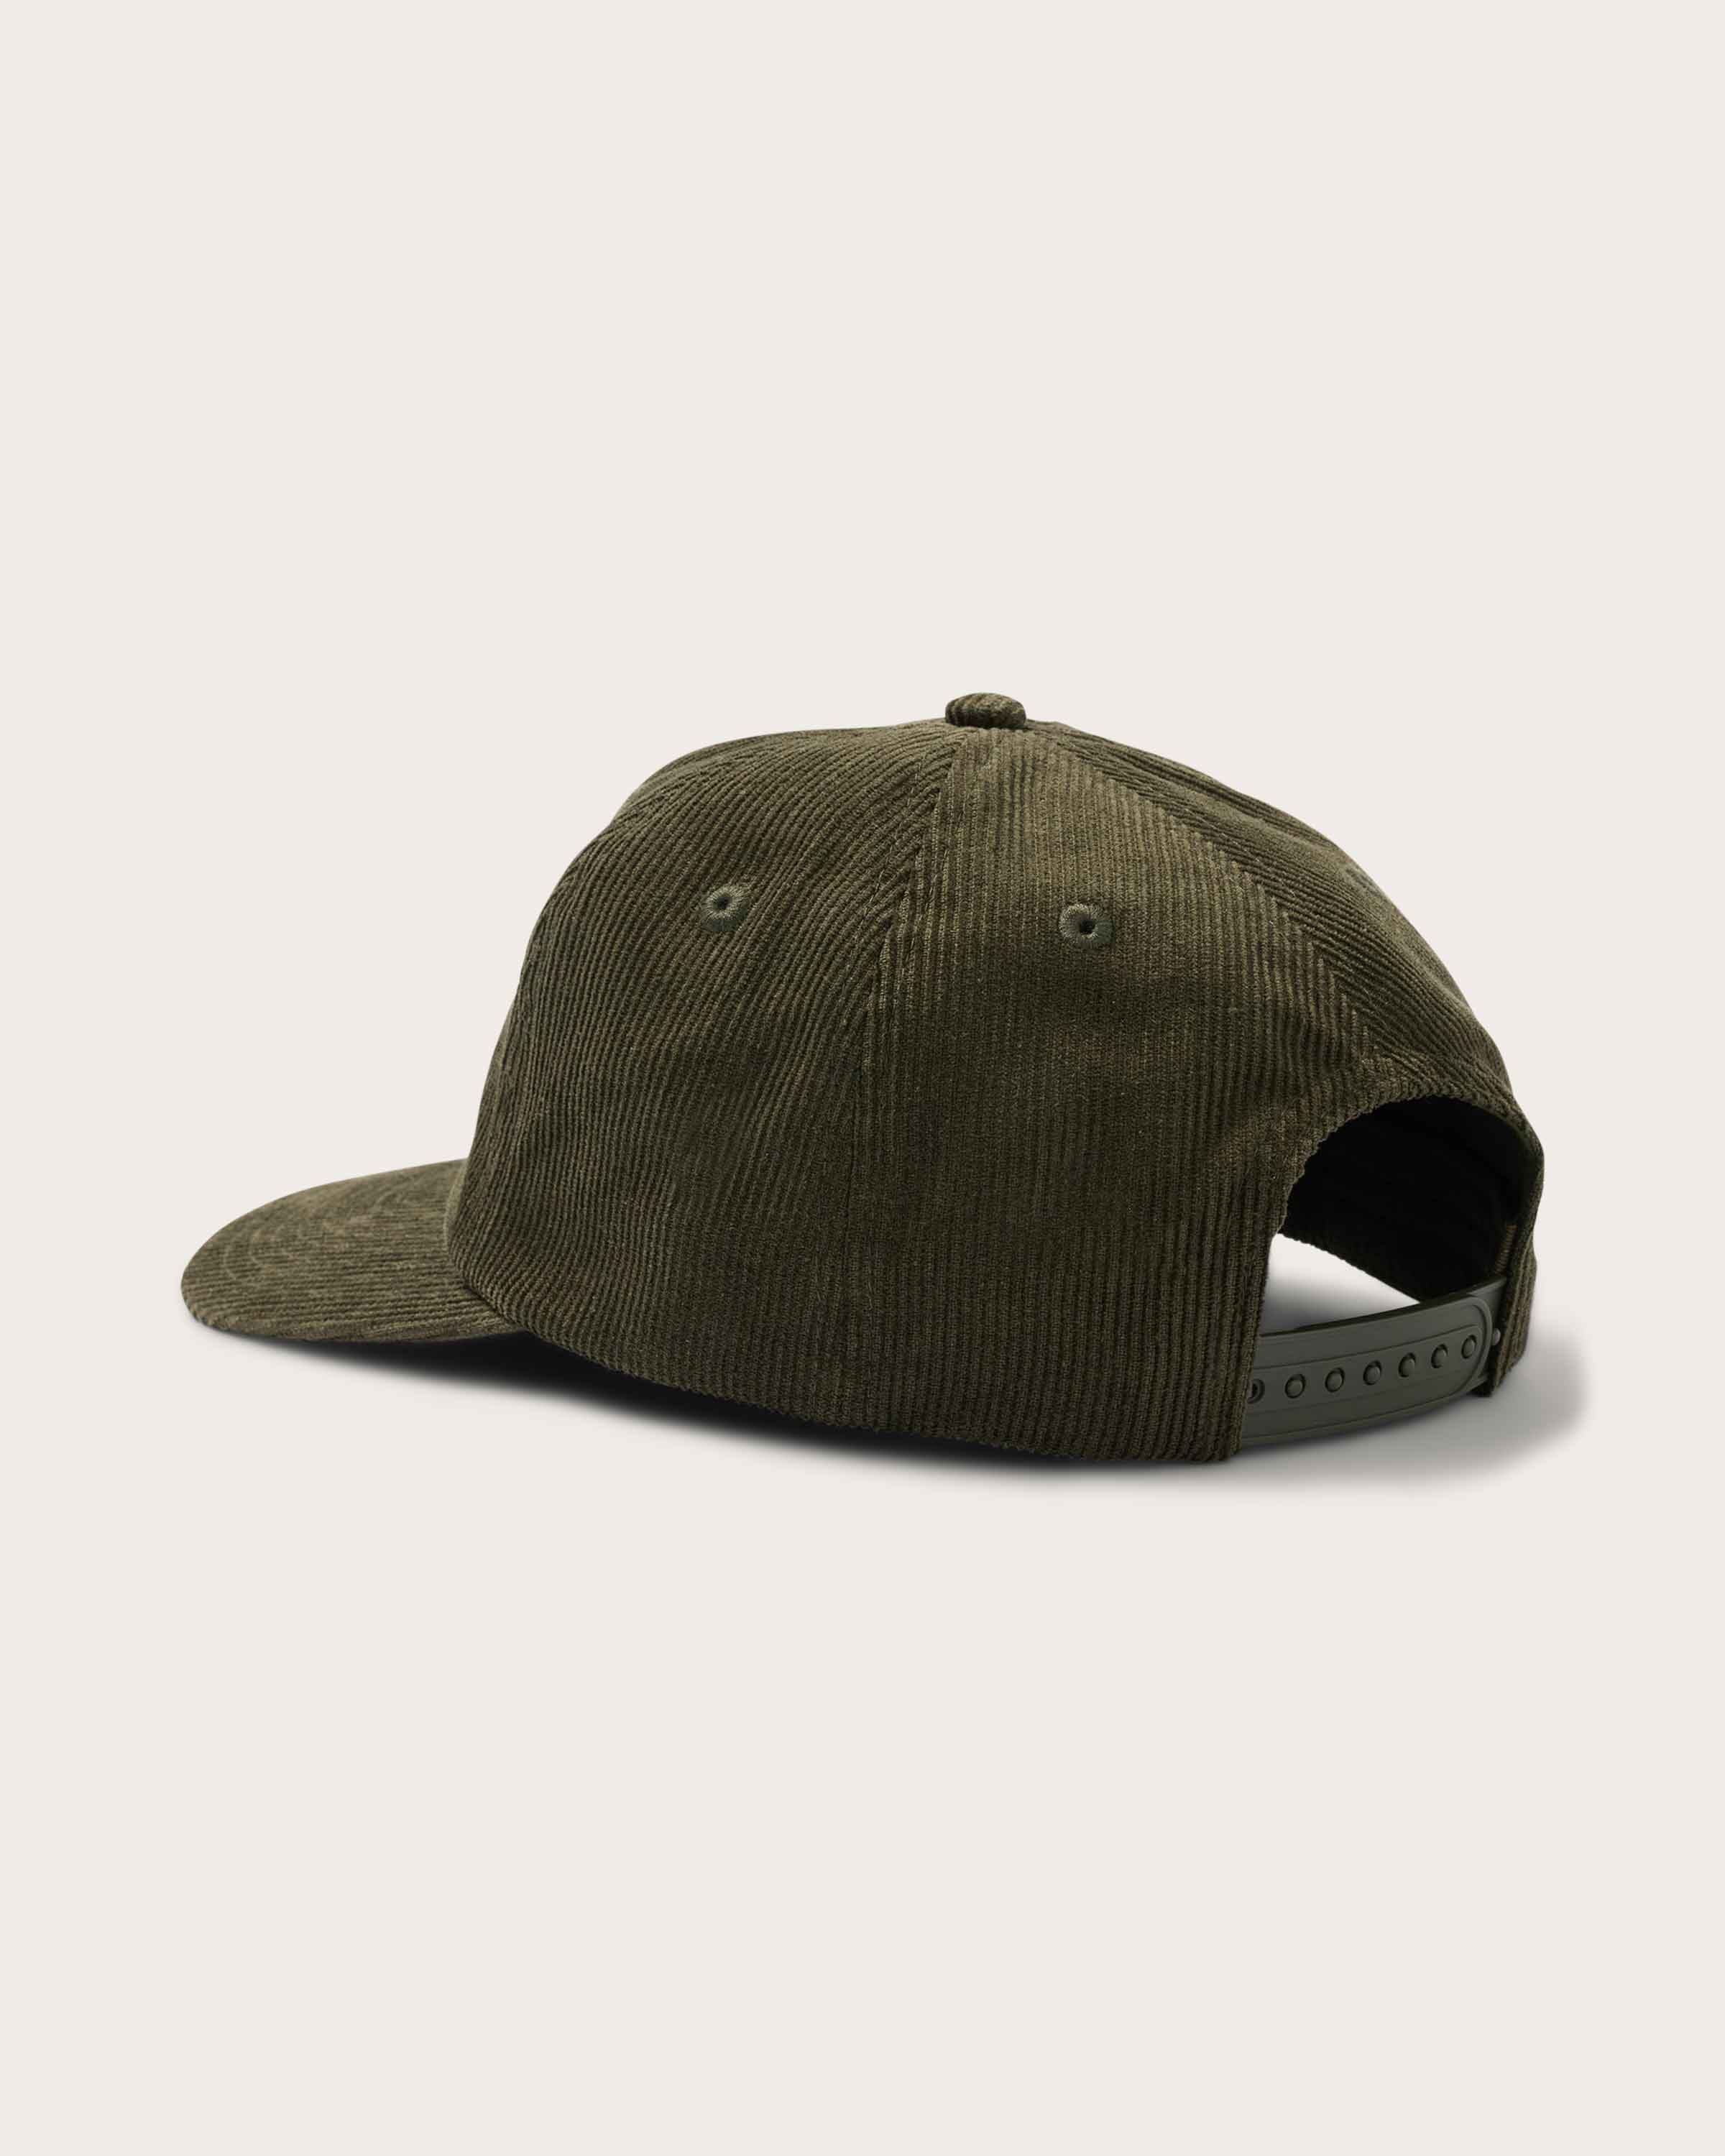 Wesley 5 Panel Hat in Olive - undefined - Hemlock Hat Co. Ball Caps